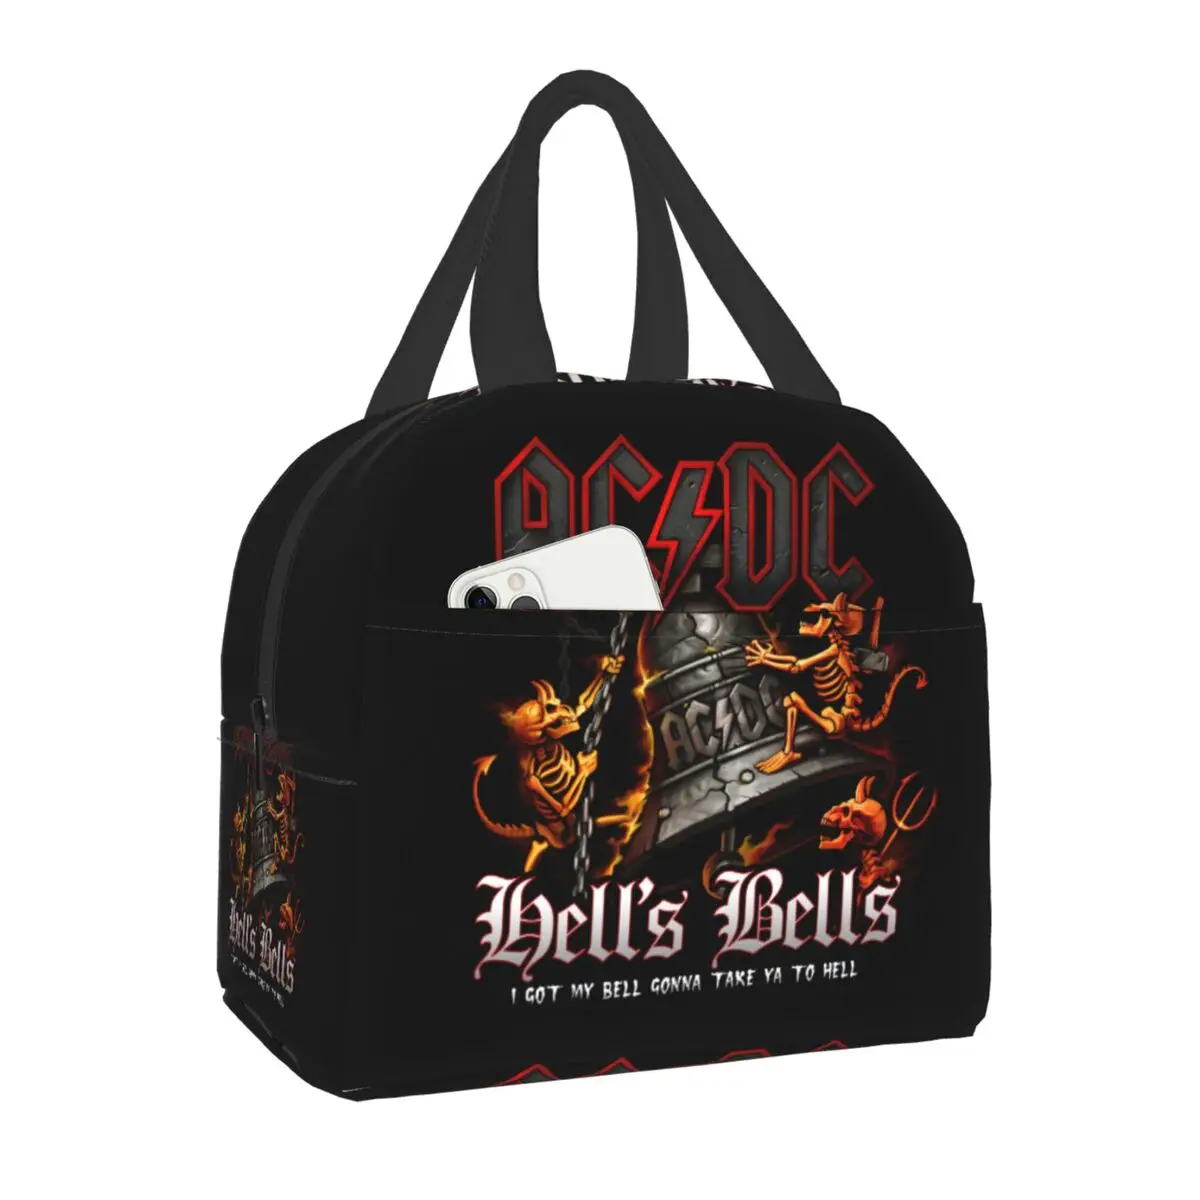 Hells Bells AC DC Lunch Bag Men Women Cooler Thermal Insulated Lunch Box for Children School Outdoor Travel Picnic Food Bags